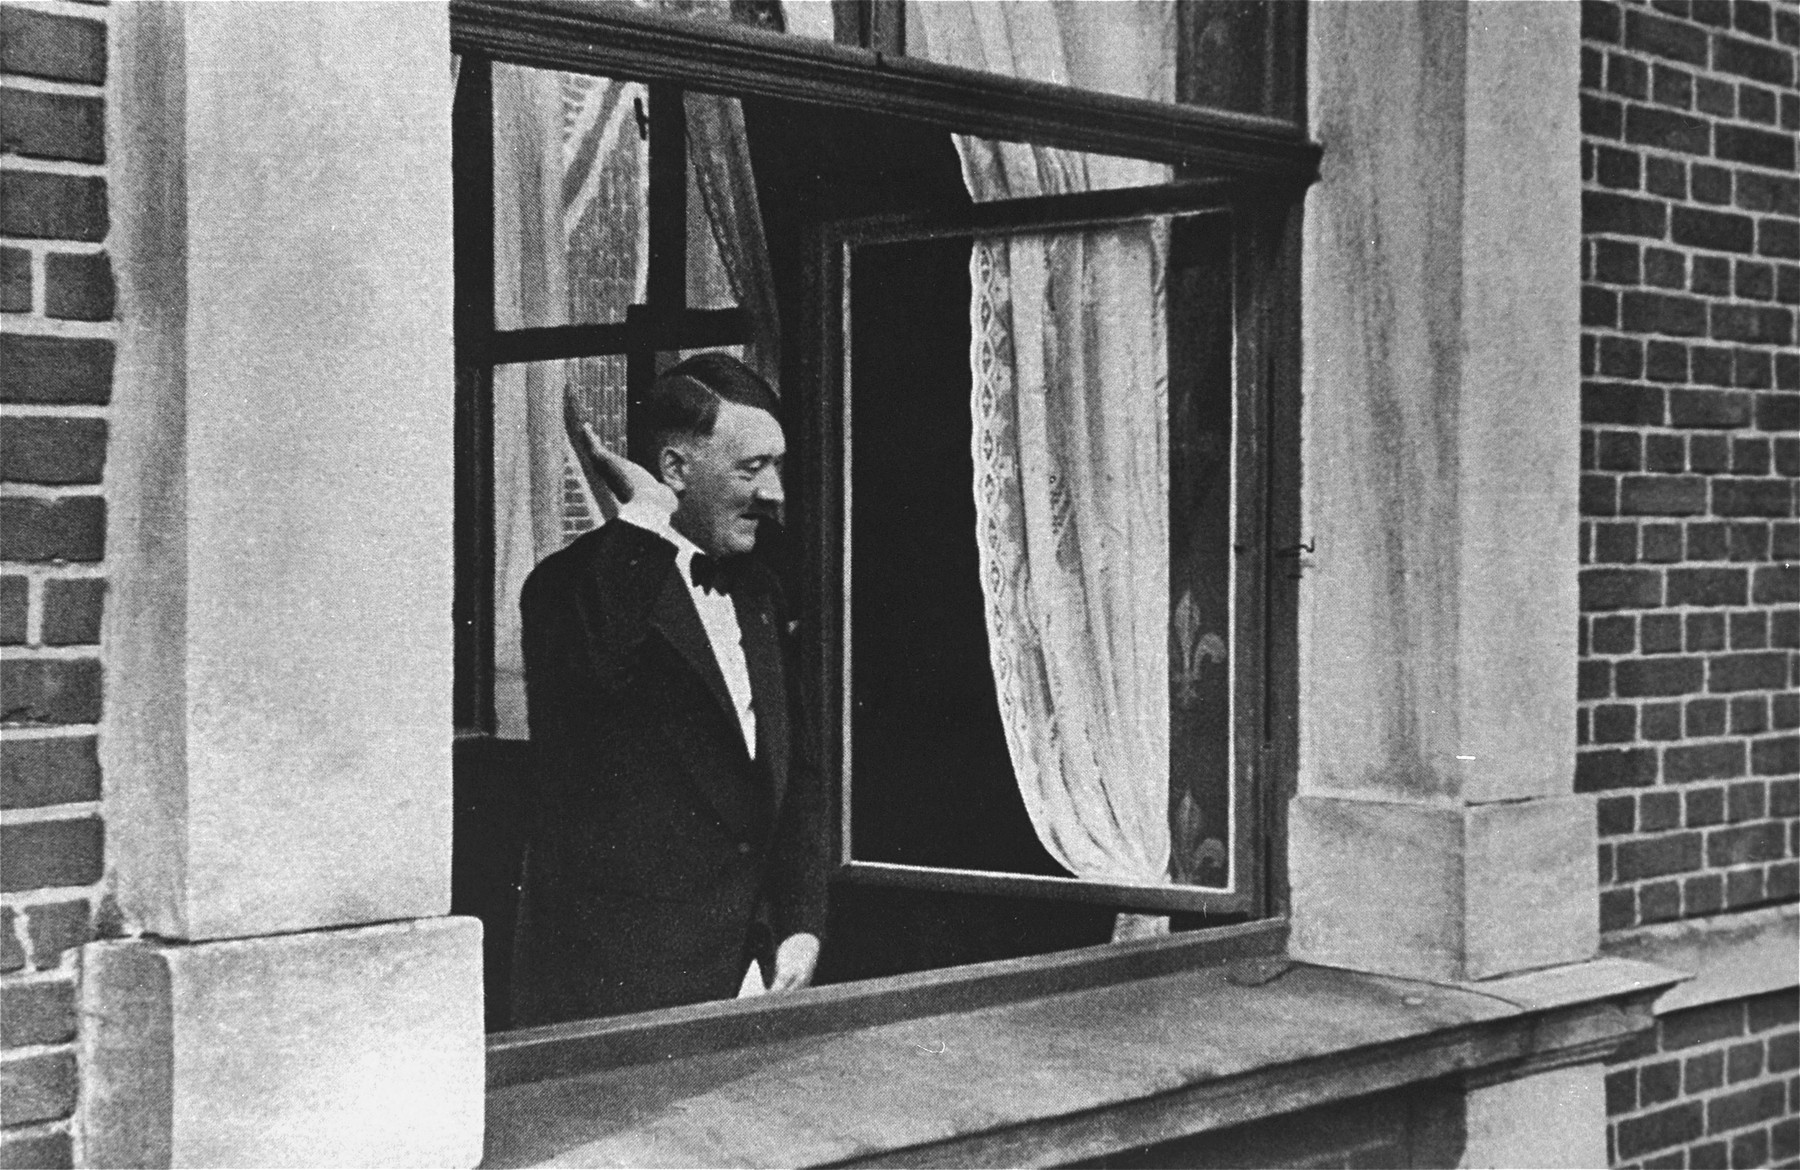 Adolf Hitler salutes a crowd from the windows of the Chancellory.

This photograph, perhaps a reenactment of his assumption of power on January 30, 1933, was reprinted as a propaganda postcard.